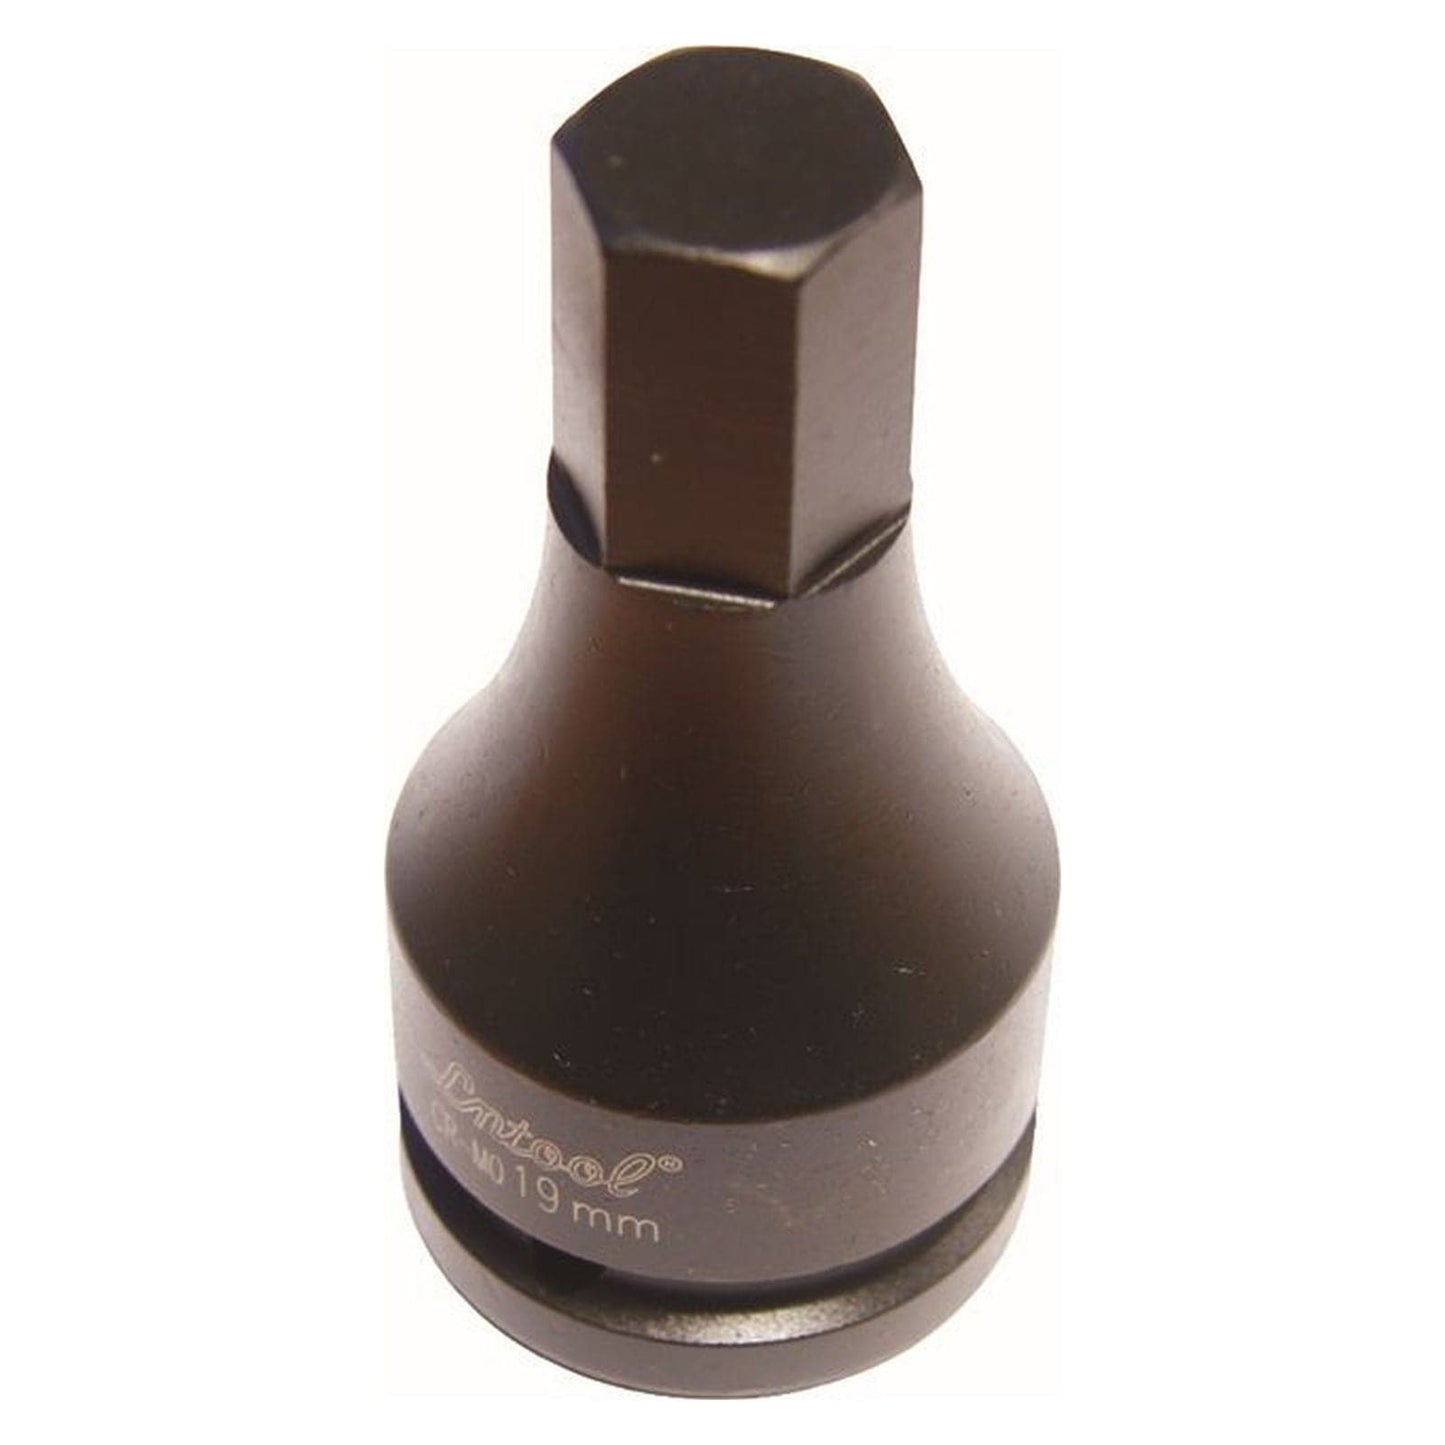 KCTools 1/2 Dr In-Hex Socket - 11364 - A&S Welding & Electrical